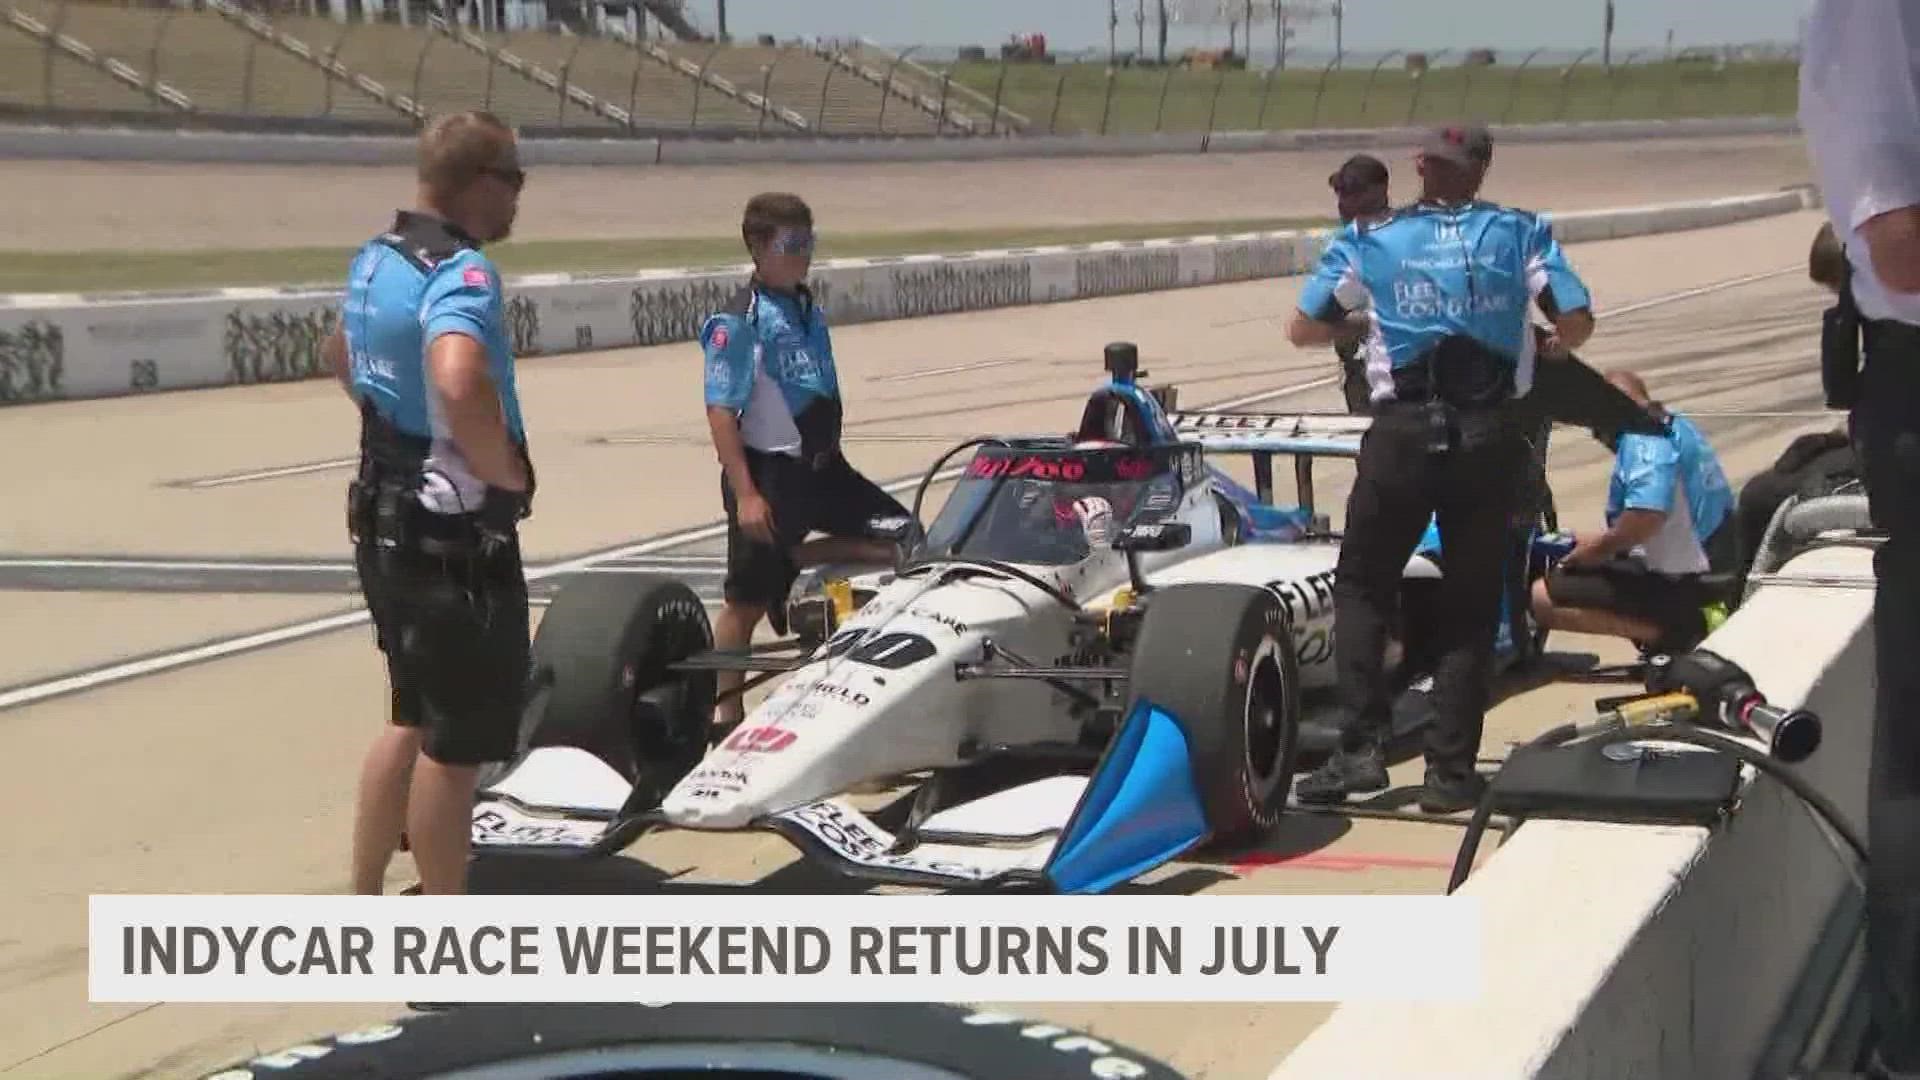 Organizers for the Hy-Vee INDYCAR Race Weekend share that fans can expect to see, hear and eat more at this year's race.